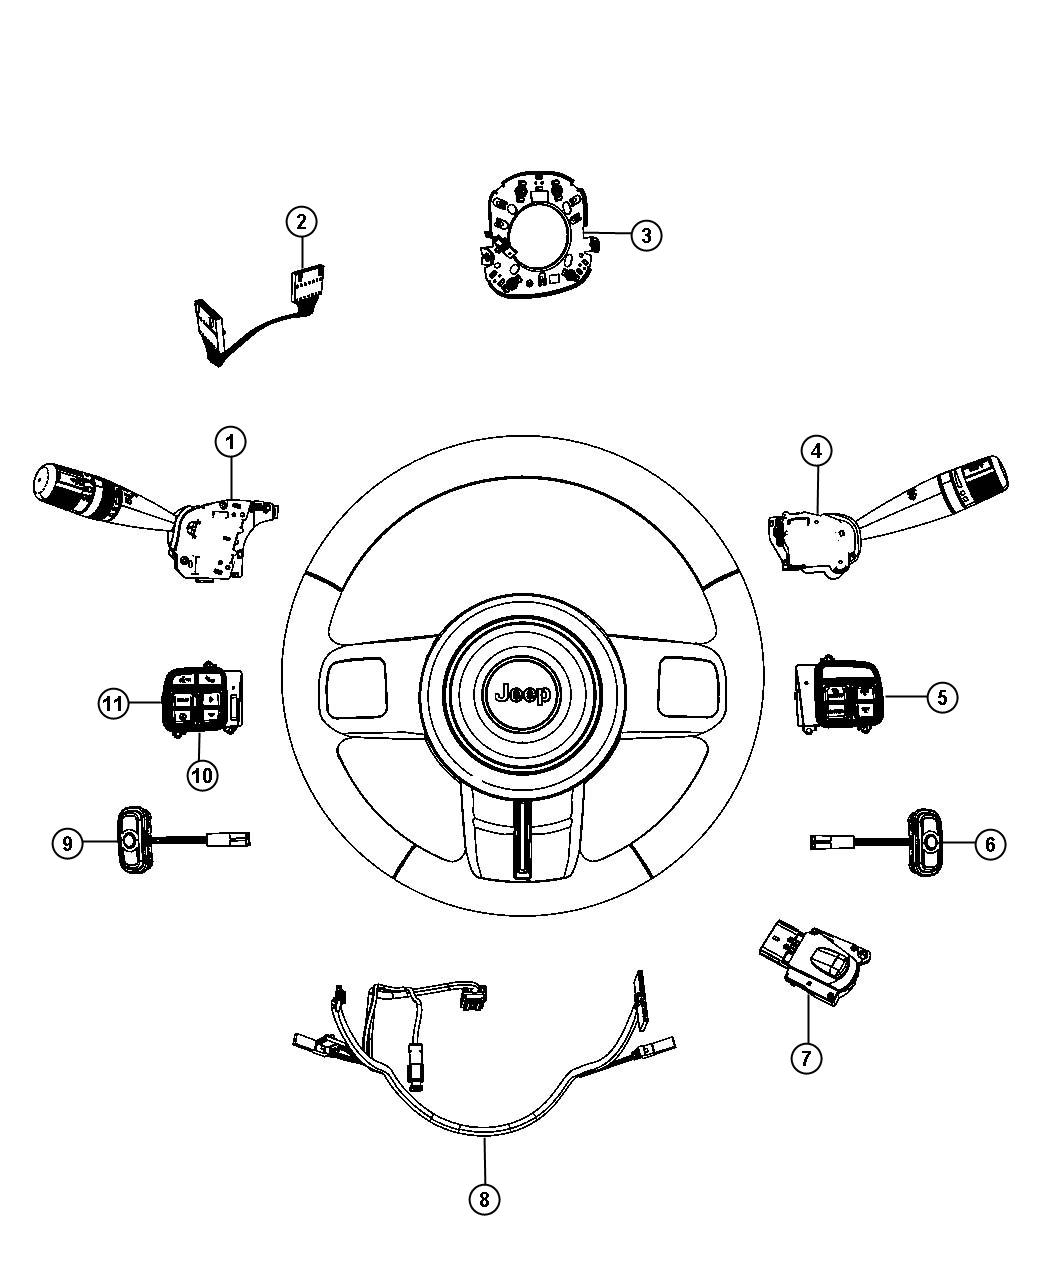 Switches, Steering Column and Wheel. Diagram